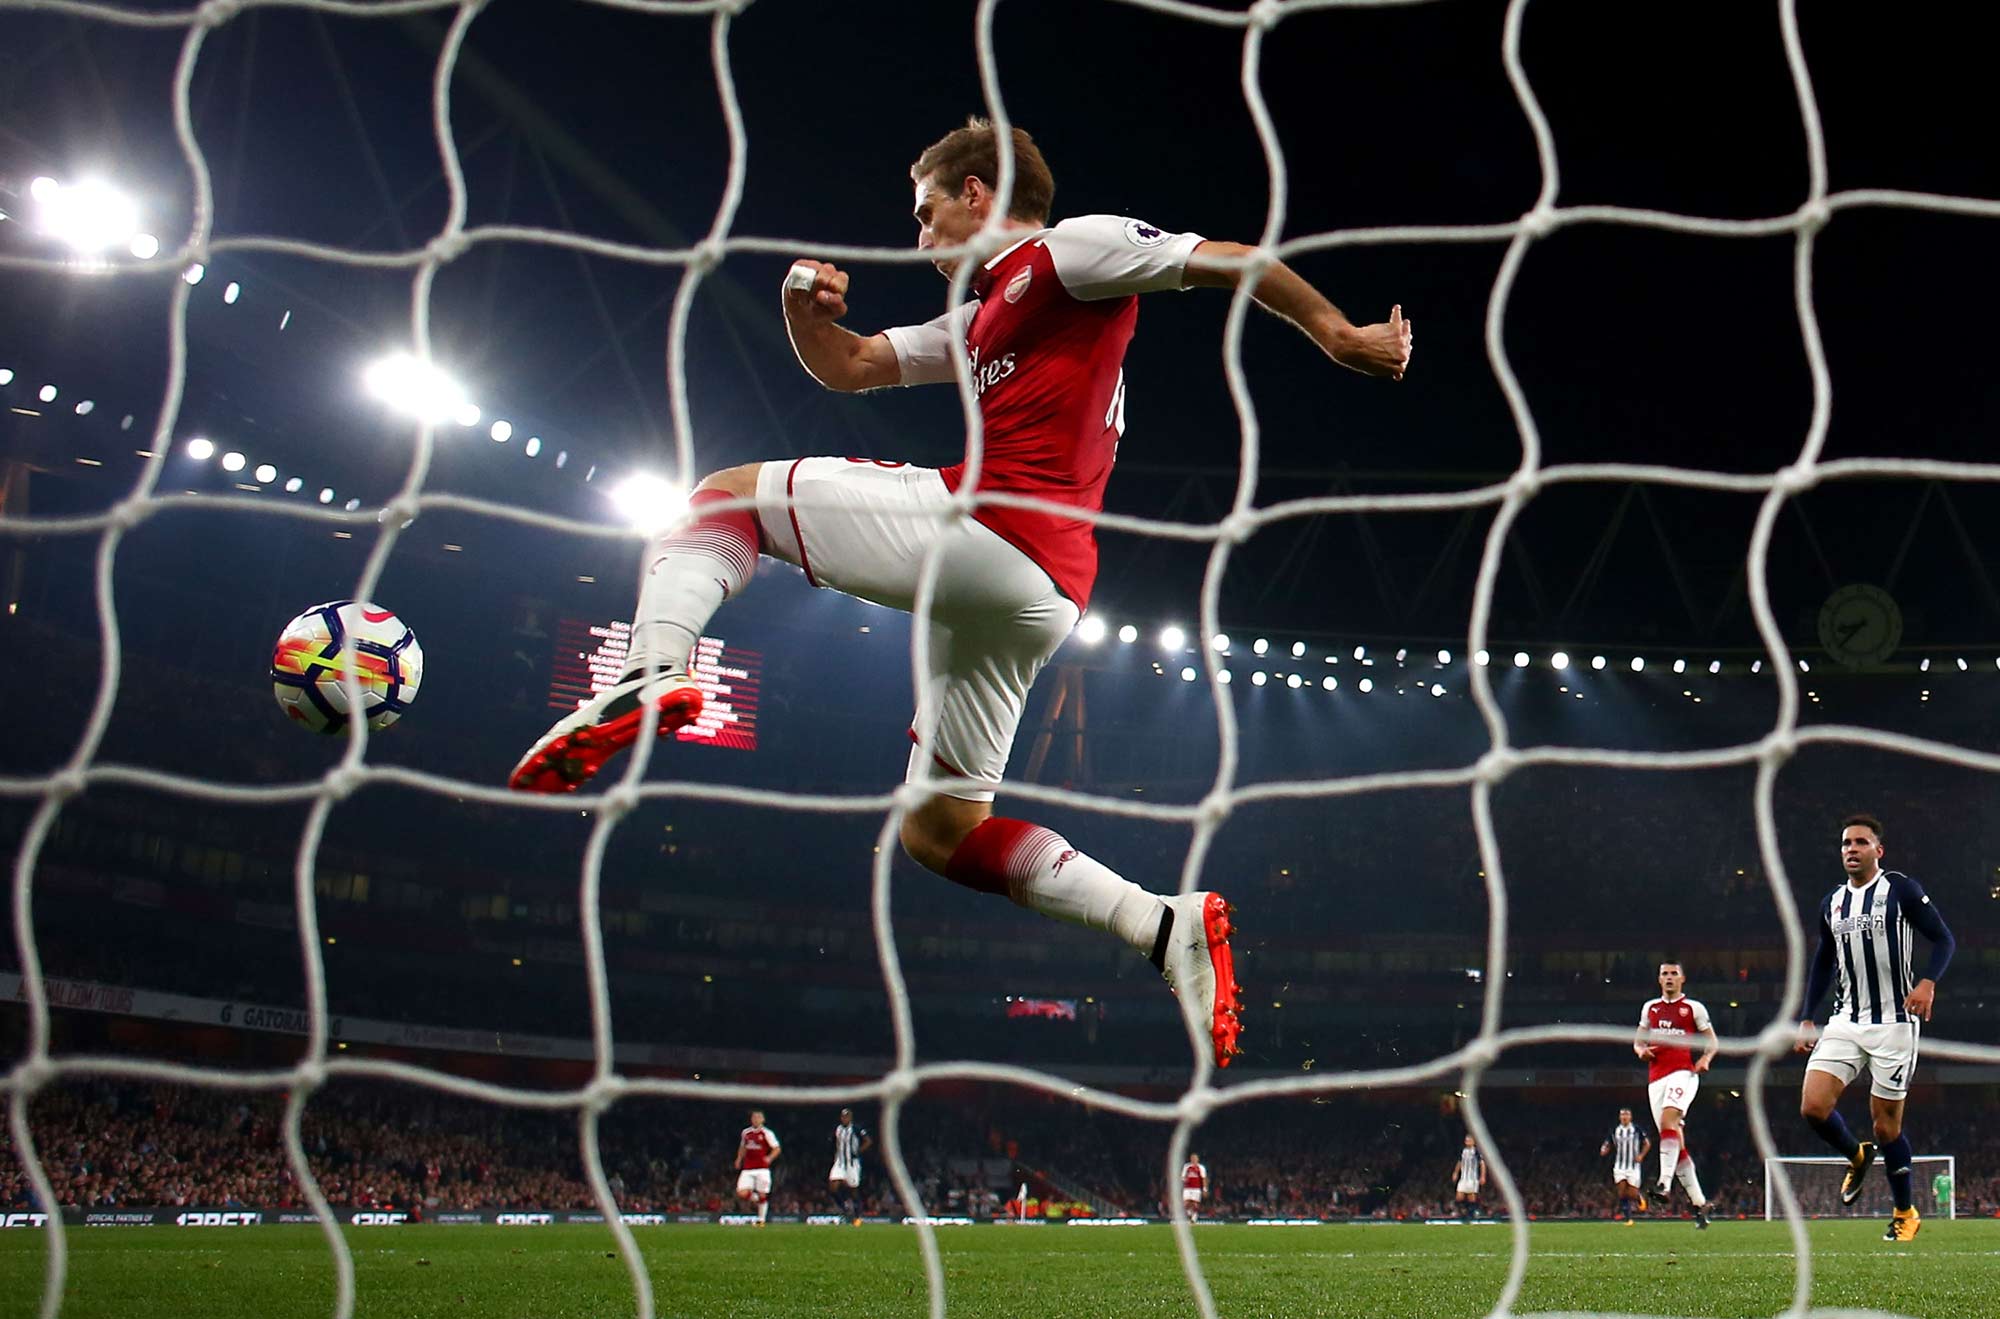 Nacho Monreal of Arsenal clears the ball from the goal line during the Premier League match between Arsenal and West Bromwich Albion at Emirates Stadium on Sept. 25, 2017 in London.&nbsp;